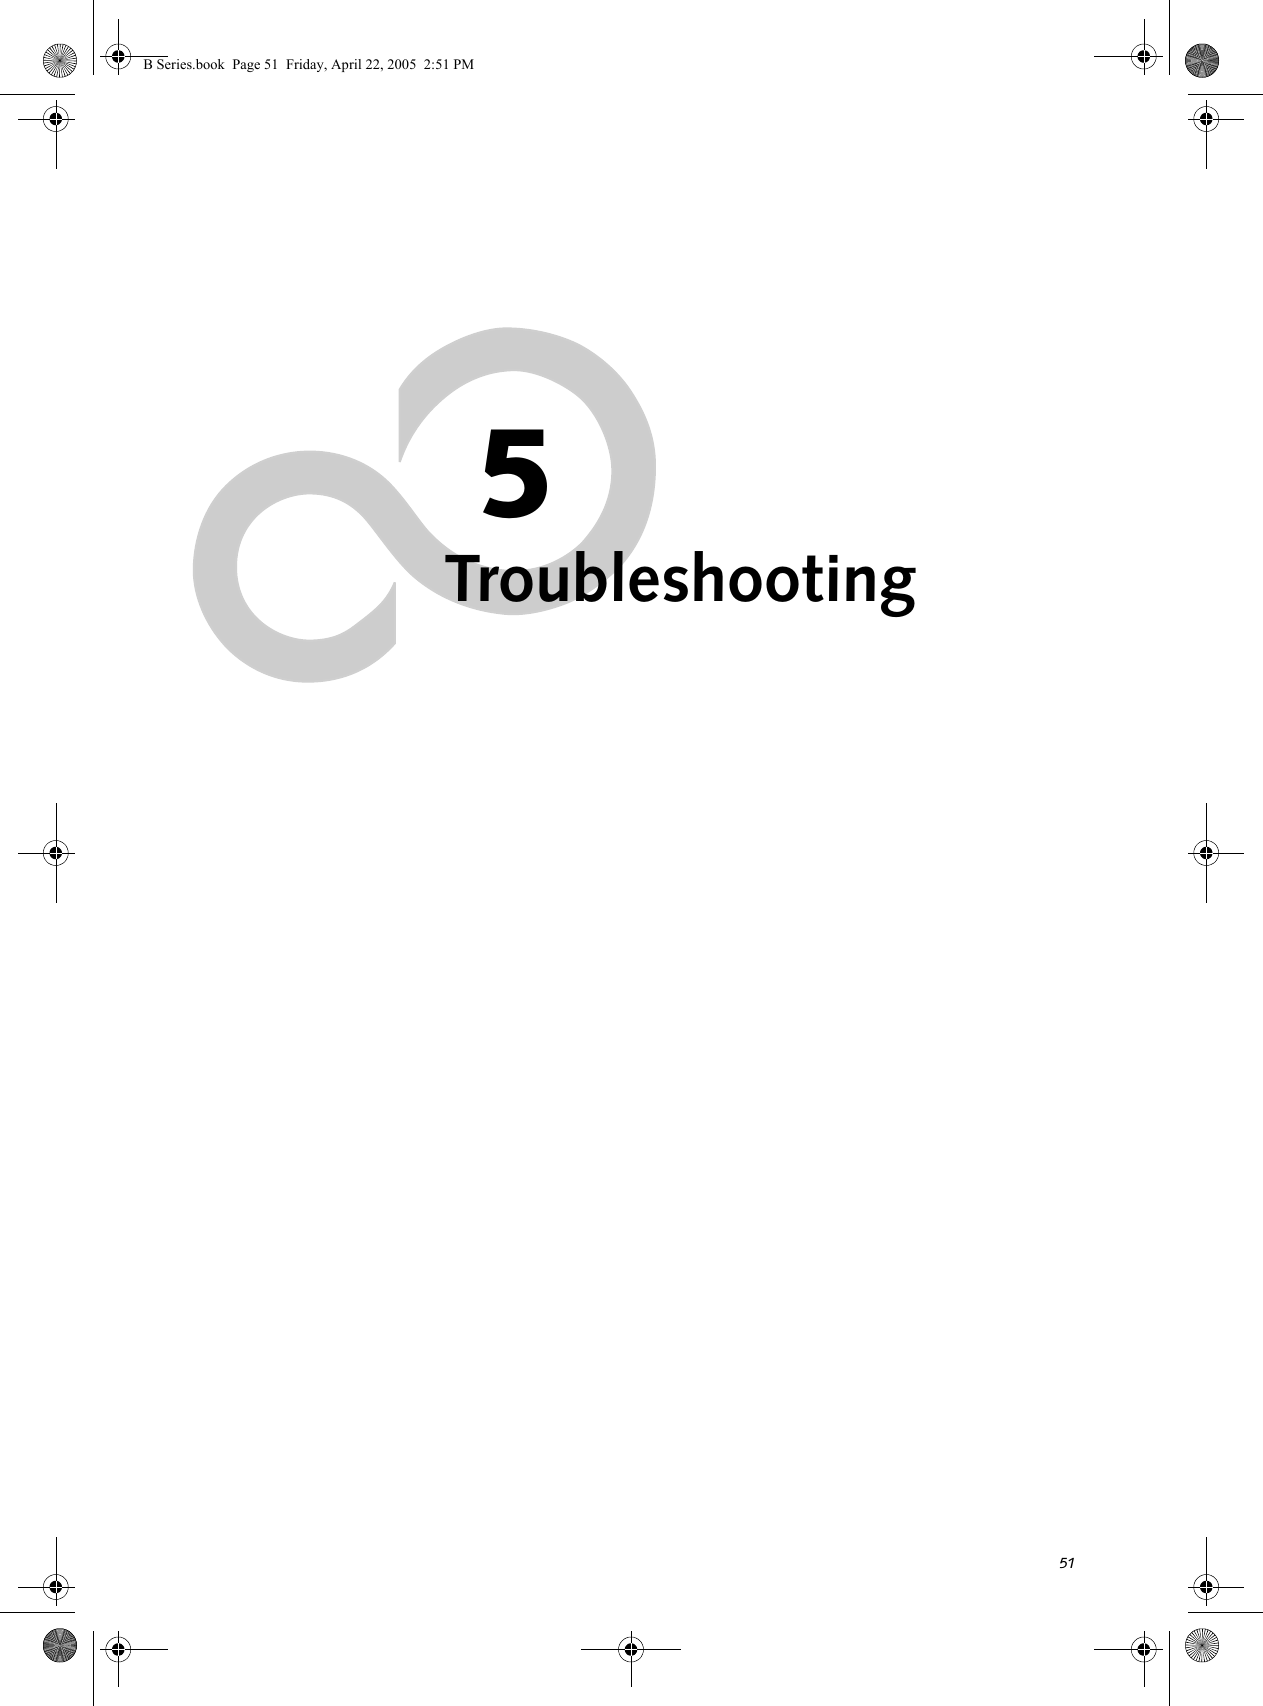 515TroubleshootingB Series.book  Page 51  Friday, April 22, 2005  2:51 PM